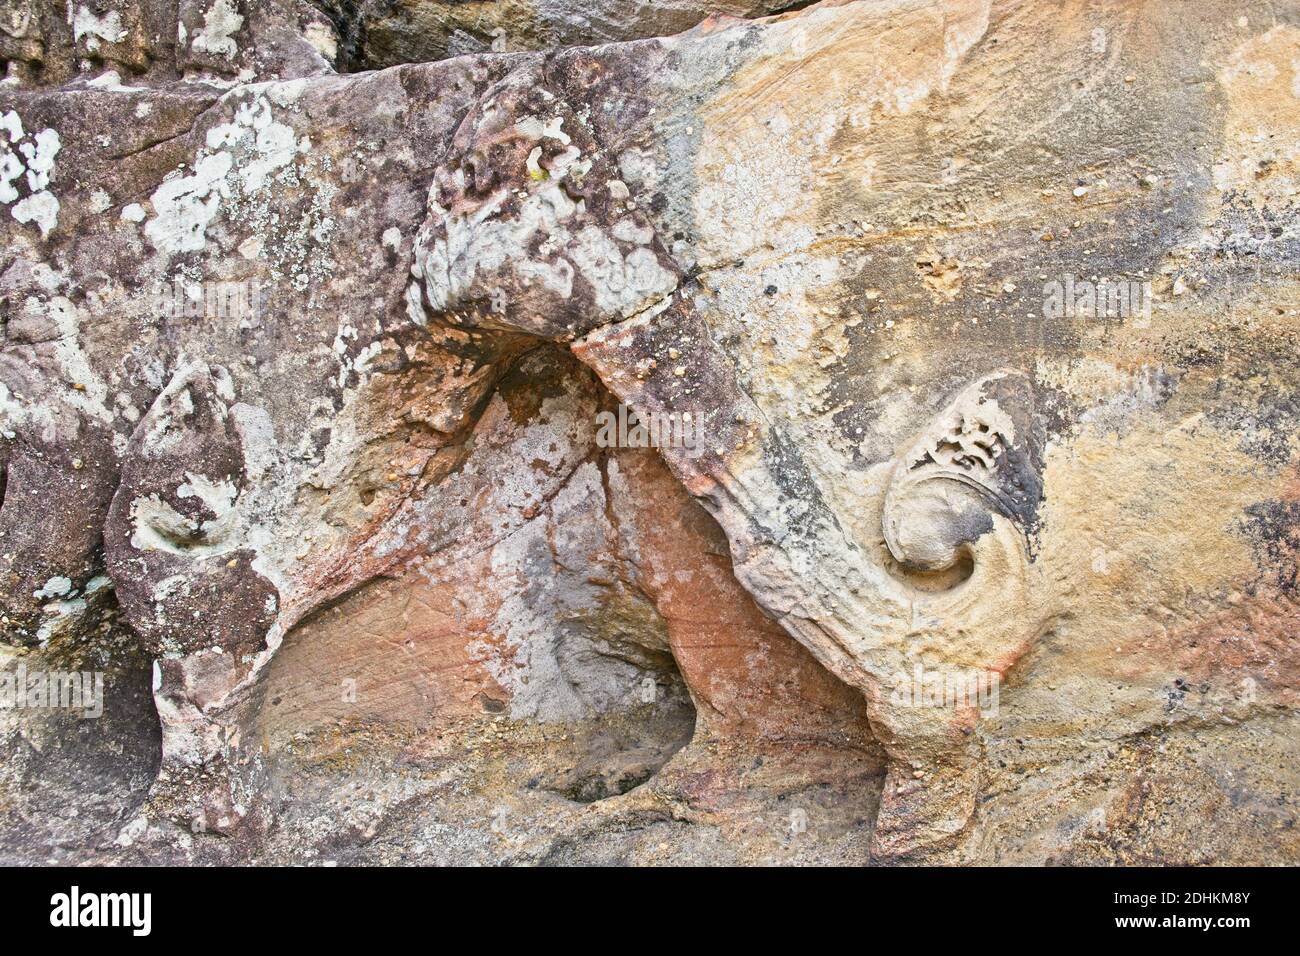 Hand carved images of Buddha and other decorations found in rock formations in secluded area within Buddha open temple. Stock Photo